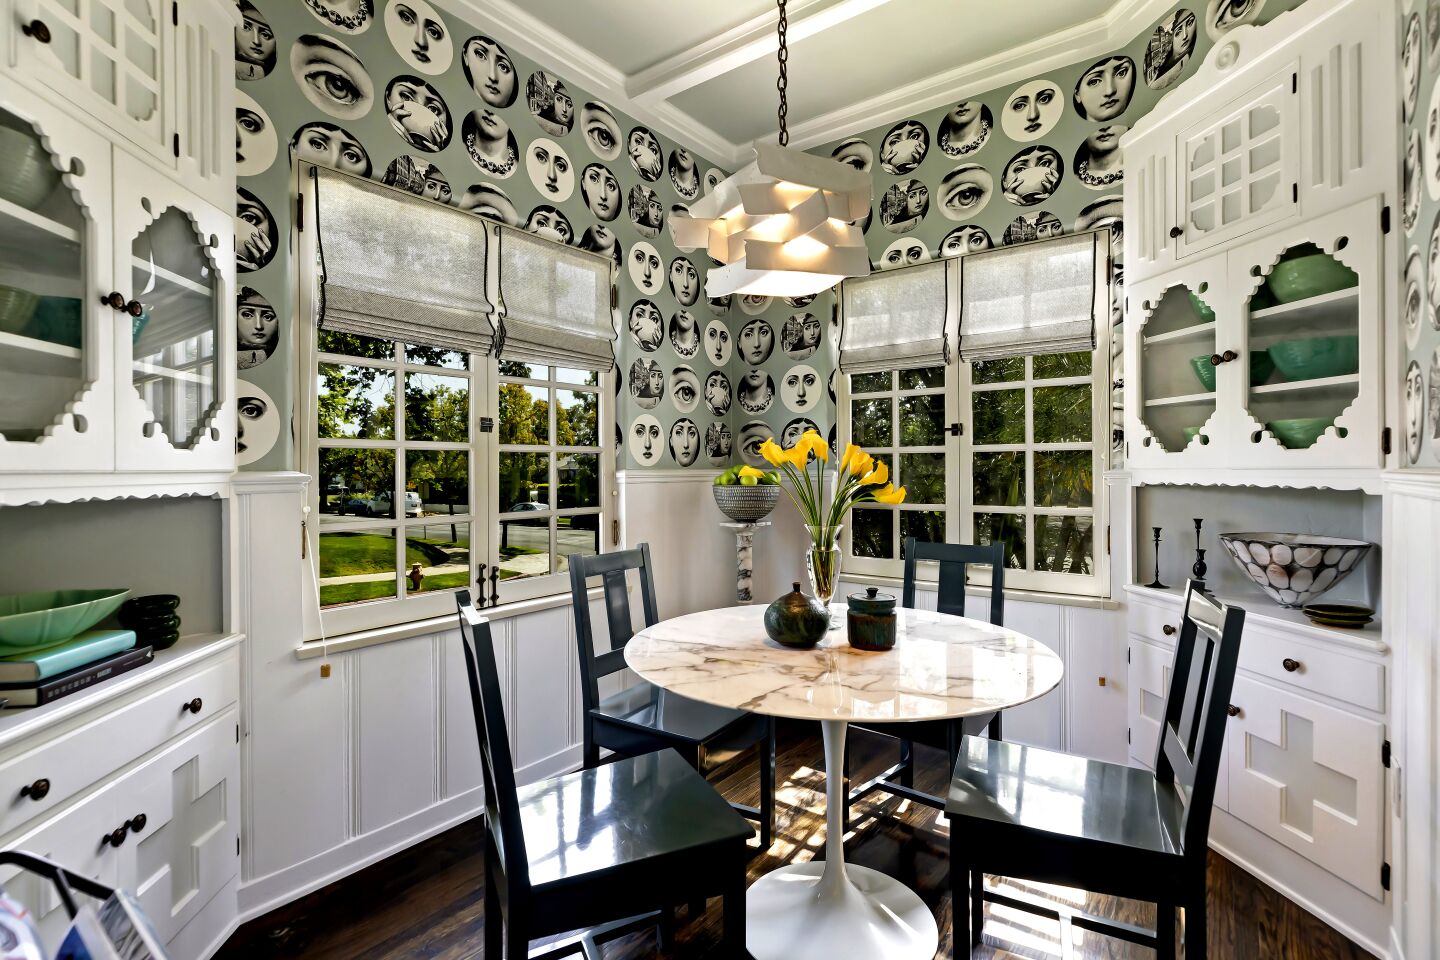 A breakfast room with striking pop art-style wallpaper and white cabinetry